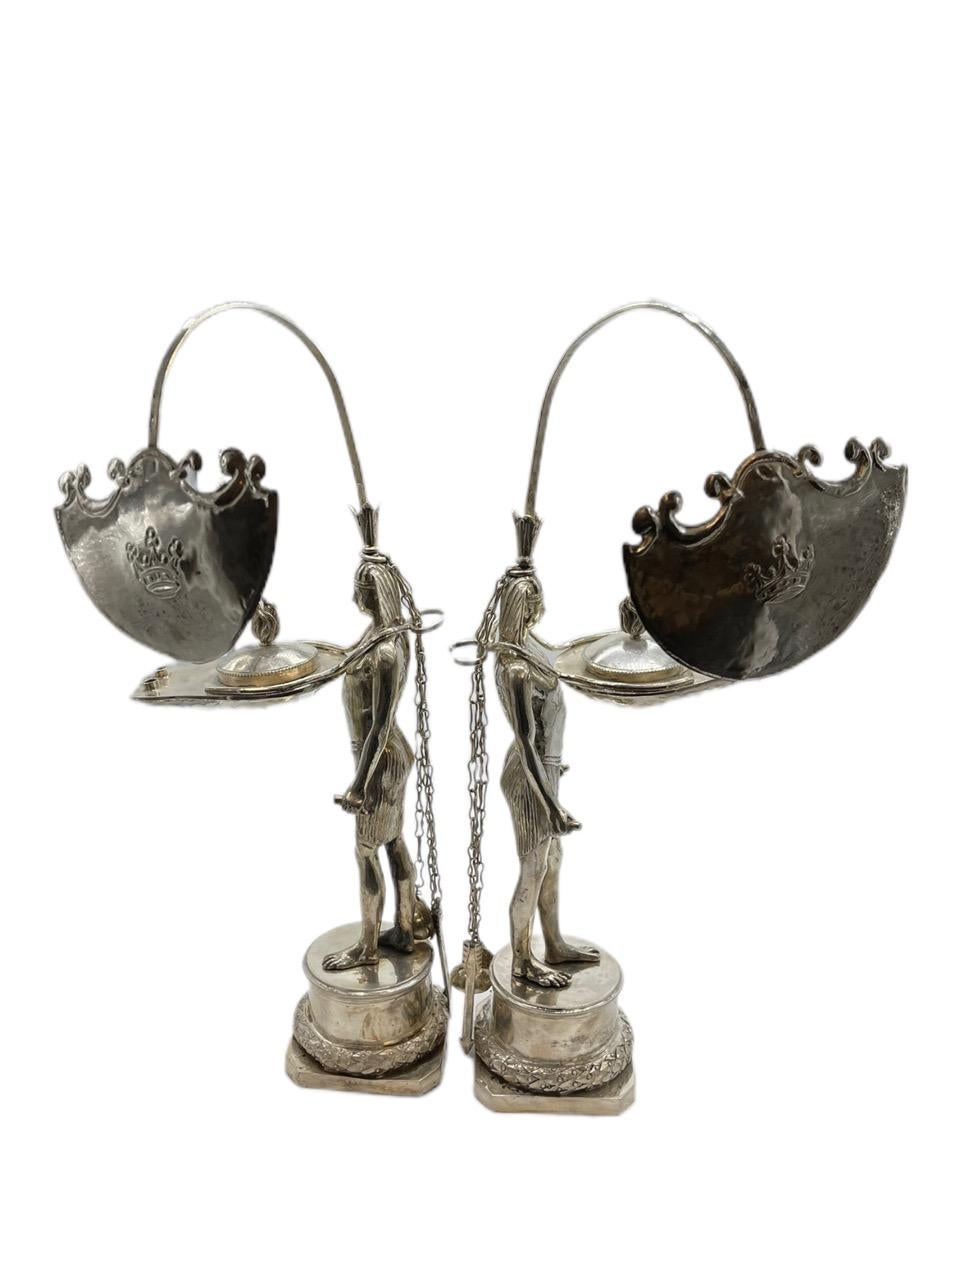 Pair of Early 19th Century Italian Antique Silver Oil Lamps by Vincenzo Belli II 2